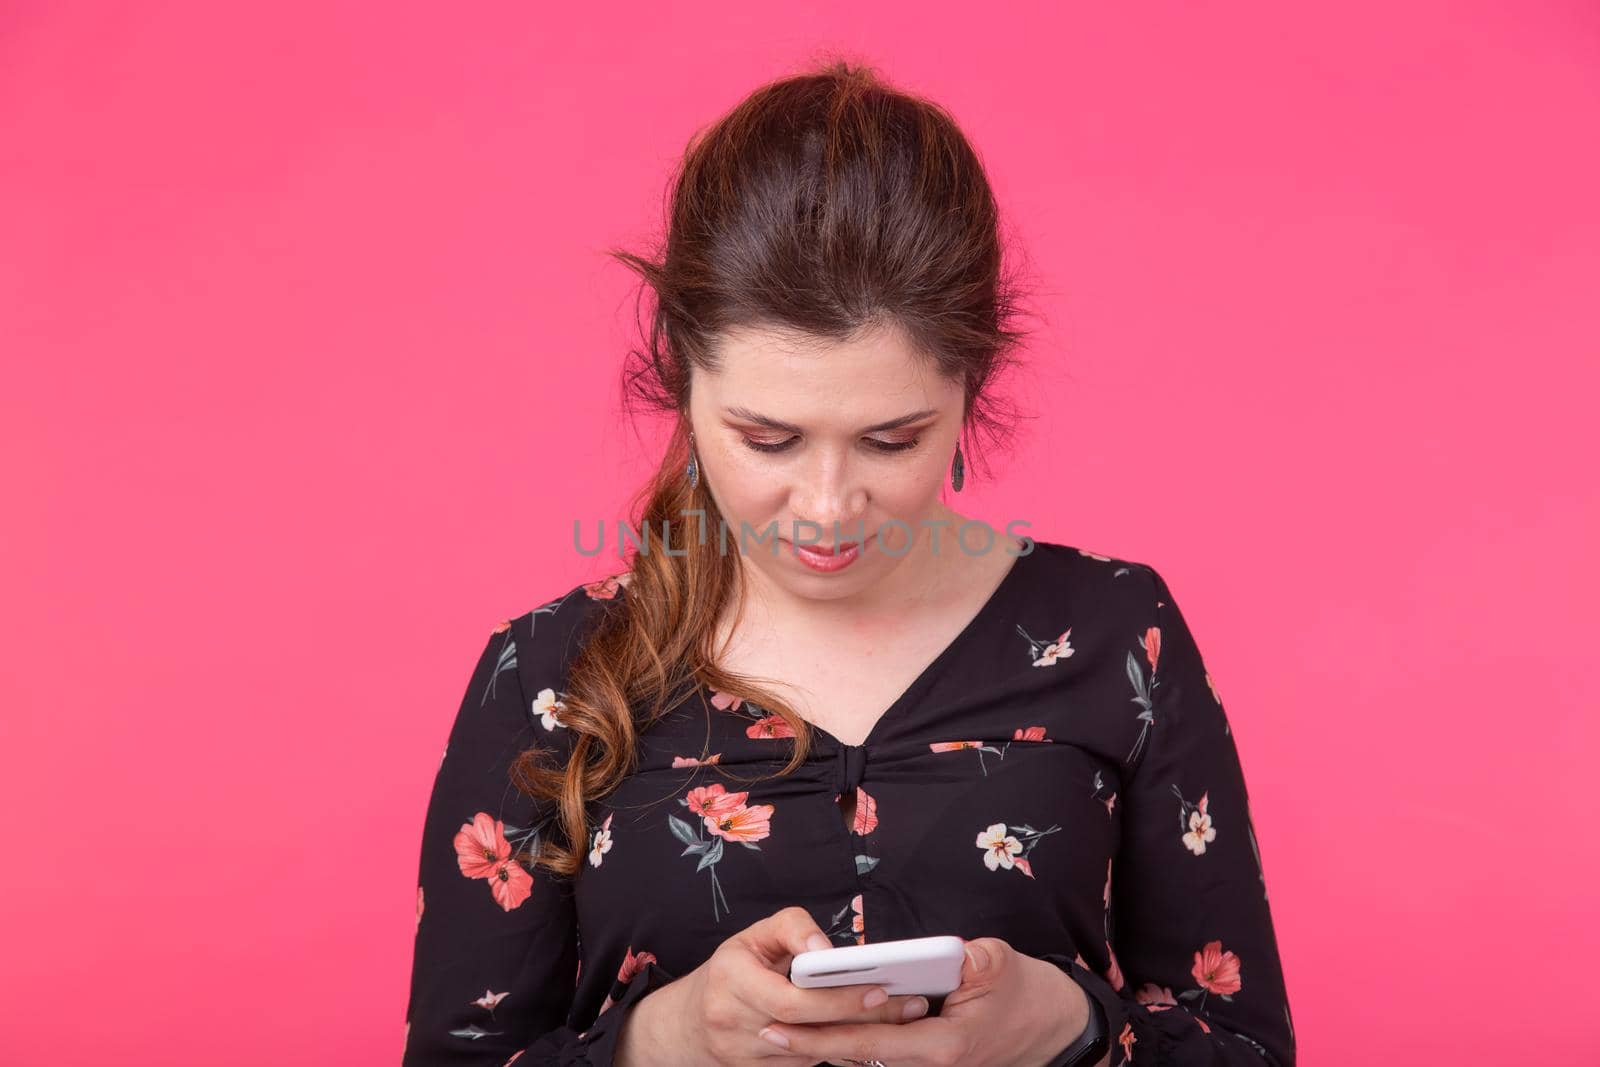 Communication and technologies concept - Portrait of a woman sending text message from her phone on pink background.